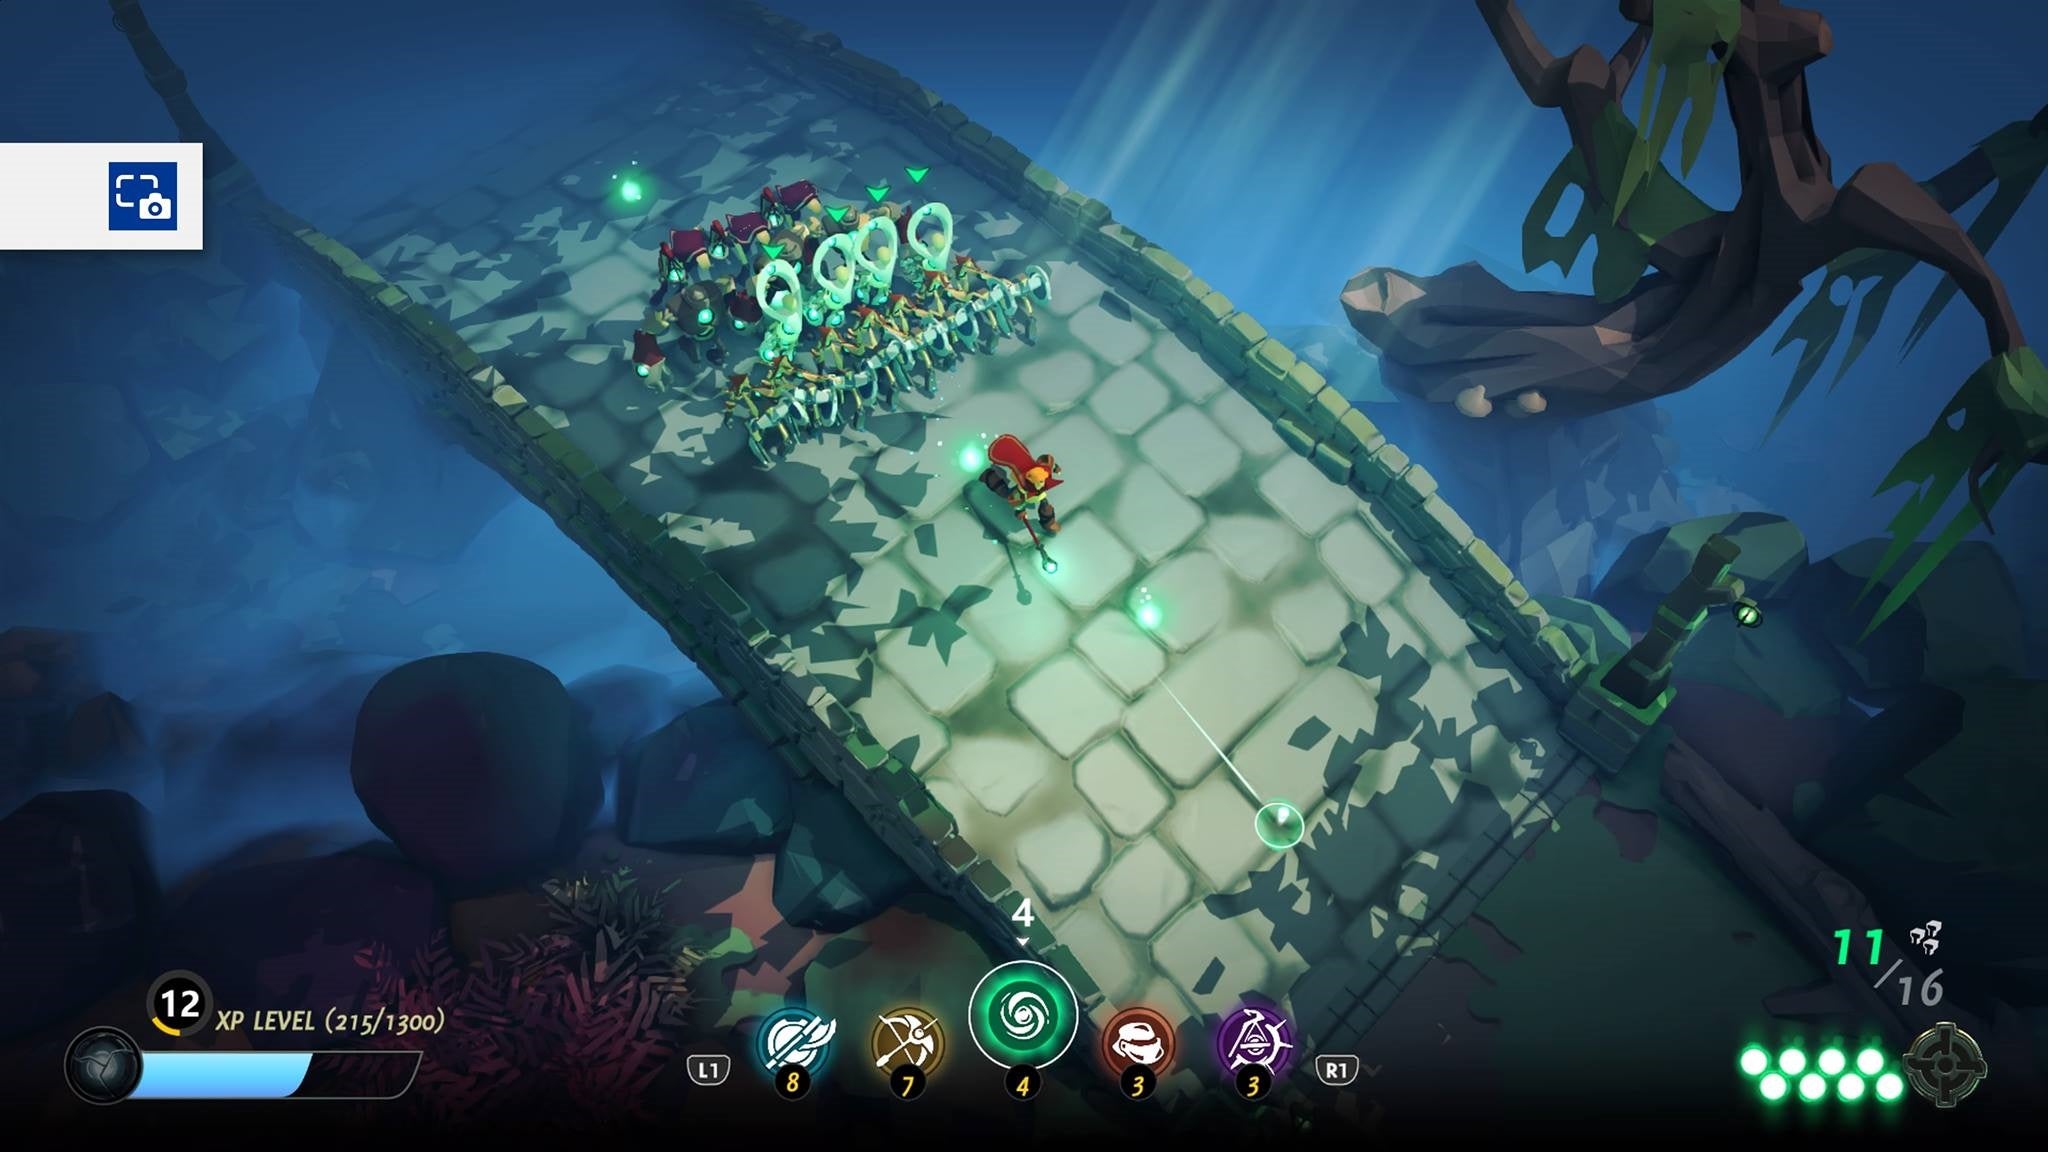 Screenshot of gameplay from Masters of Anima with character and minions.